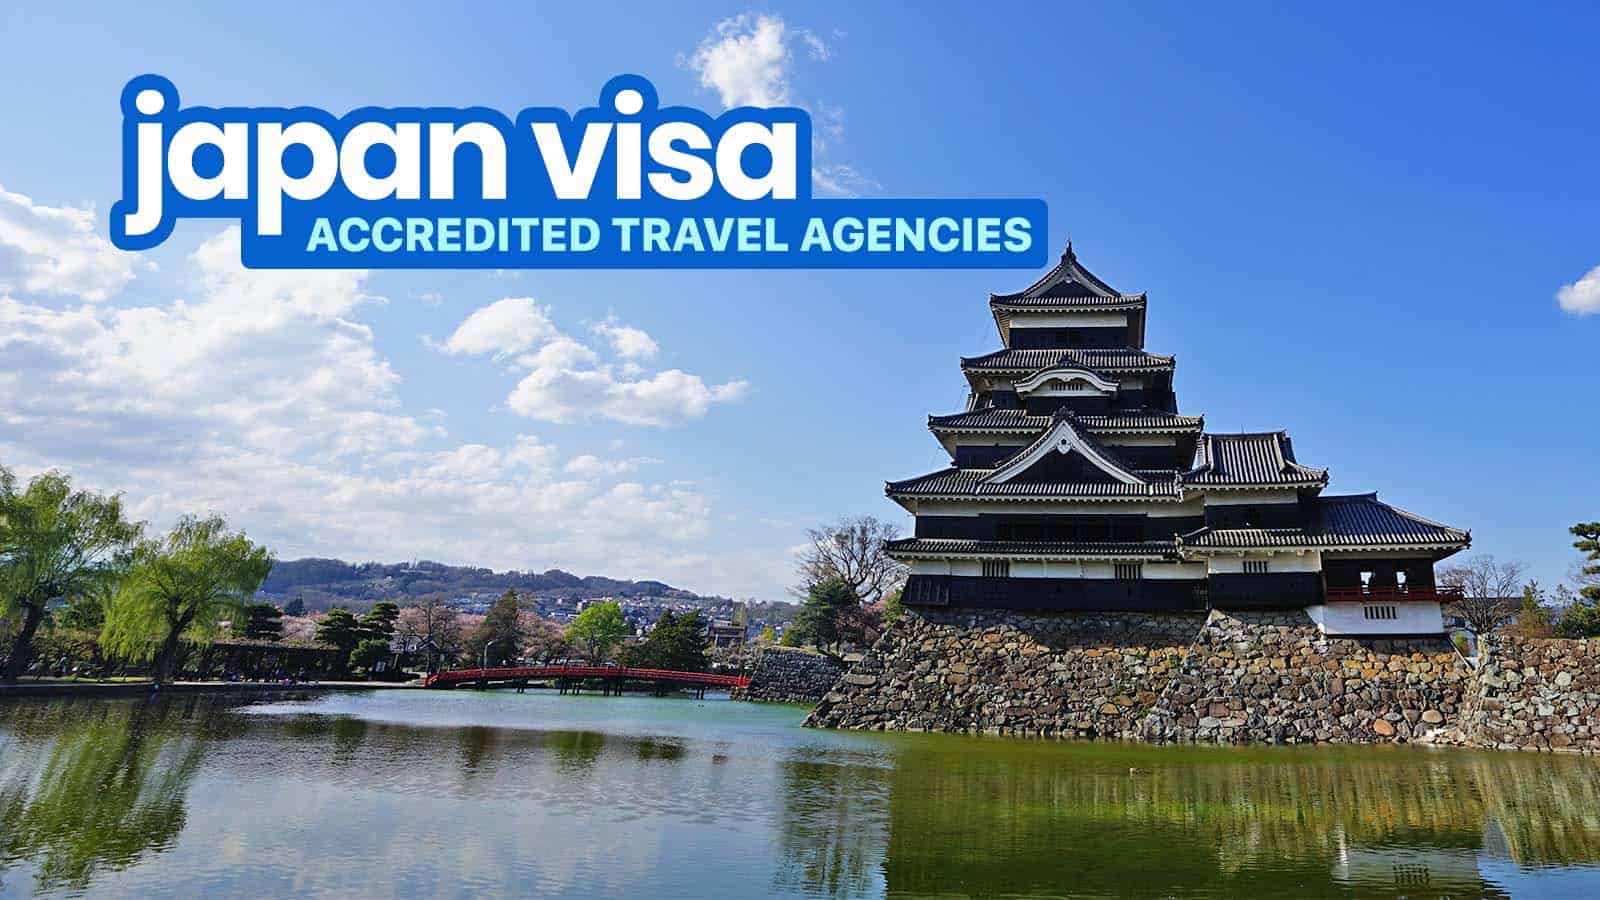 JAPAN VISA: LIST OF TRAVEL AGENCIES Accredited by the Embassy